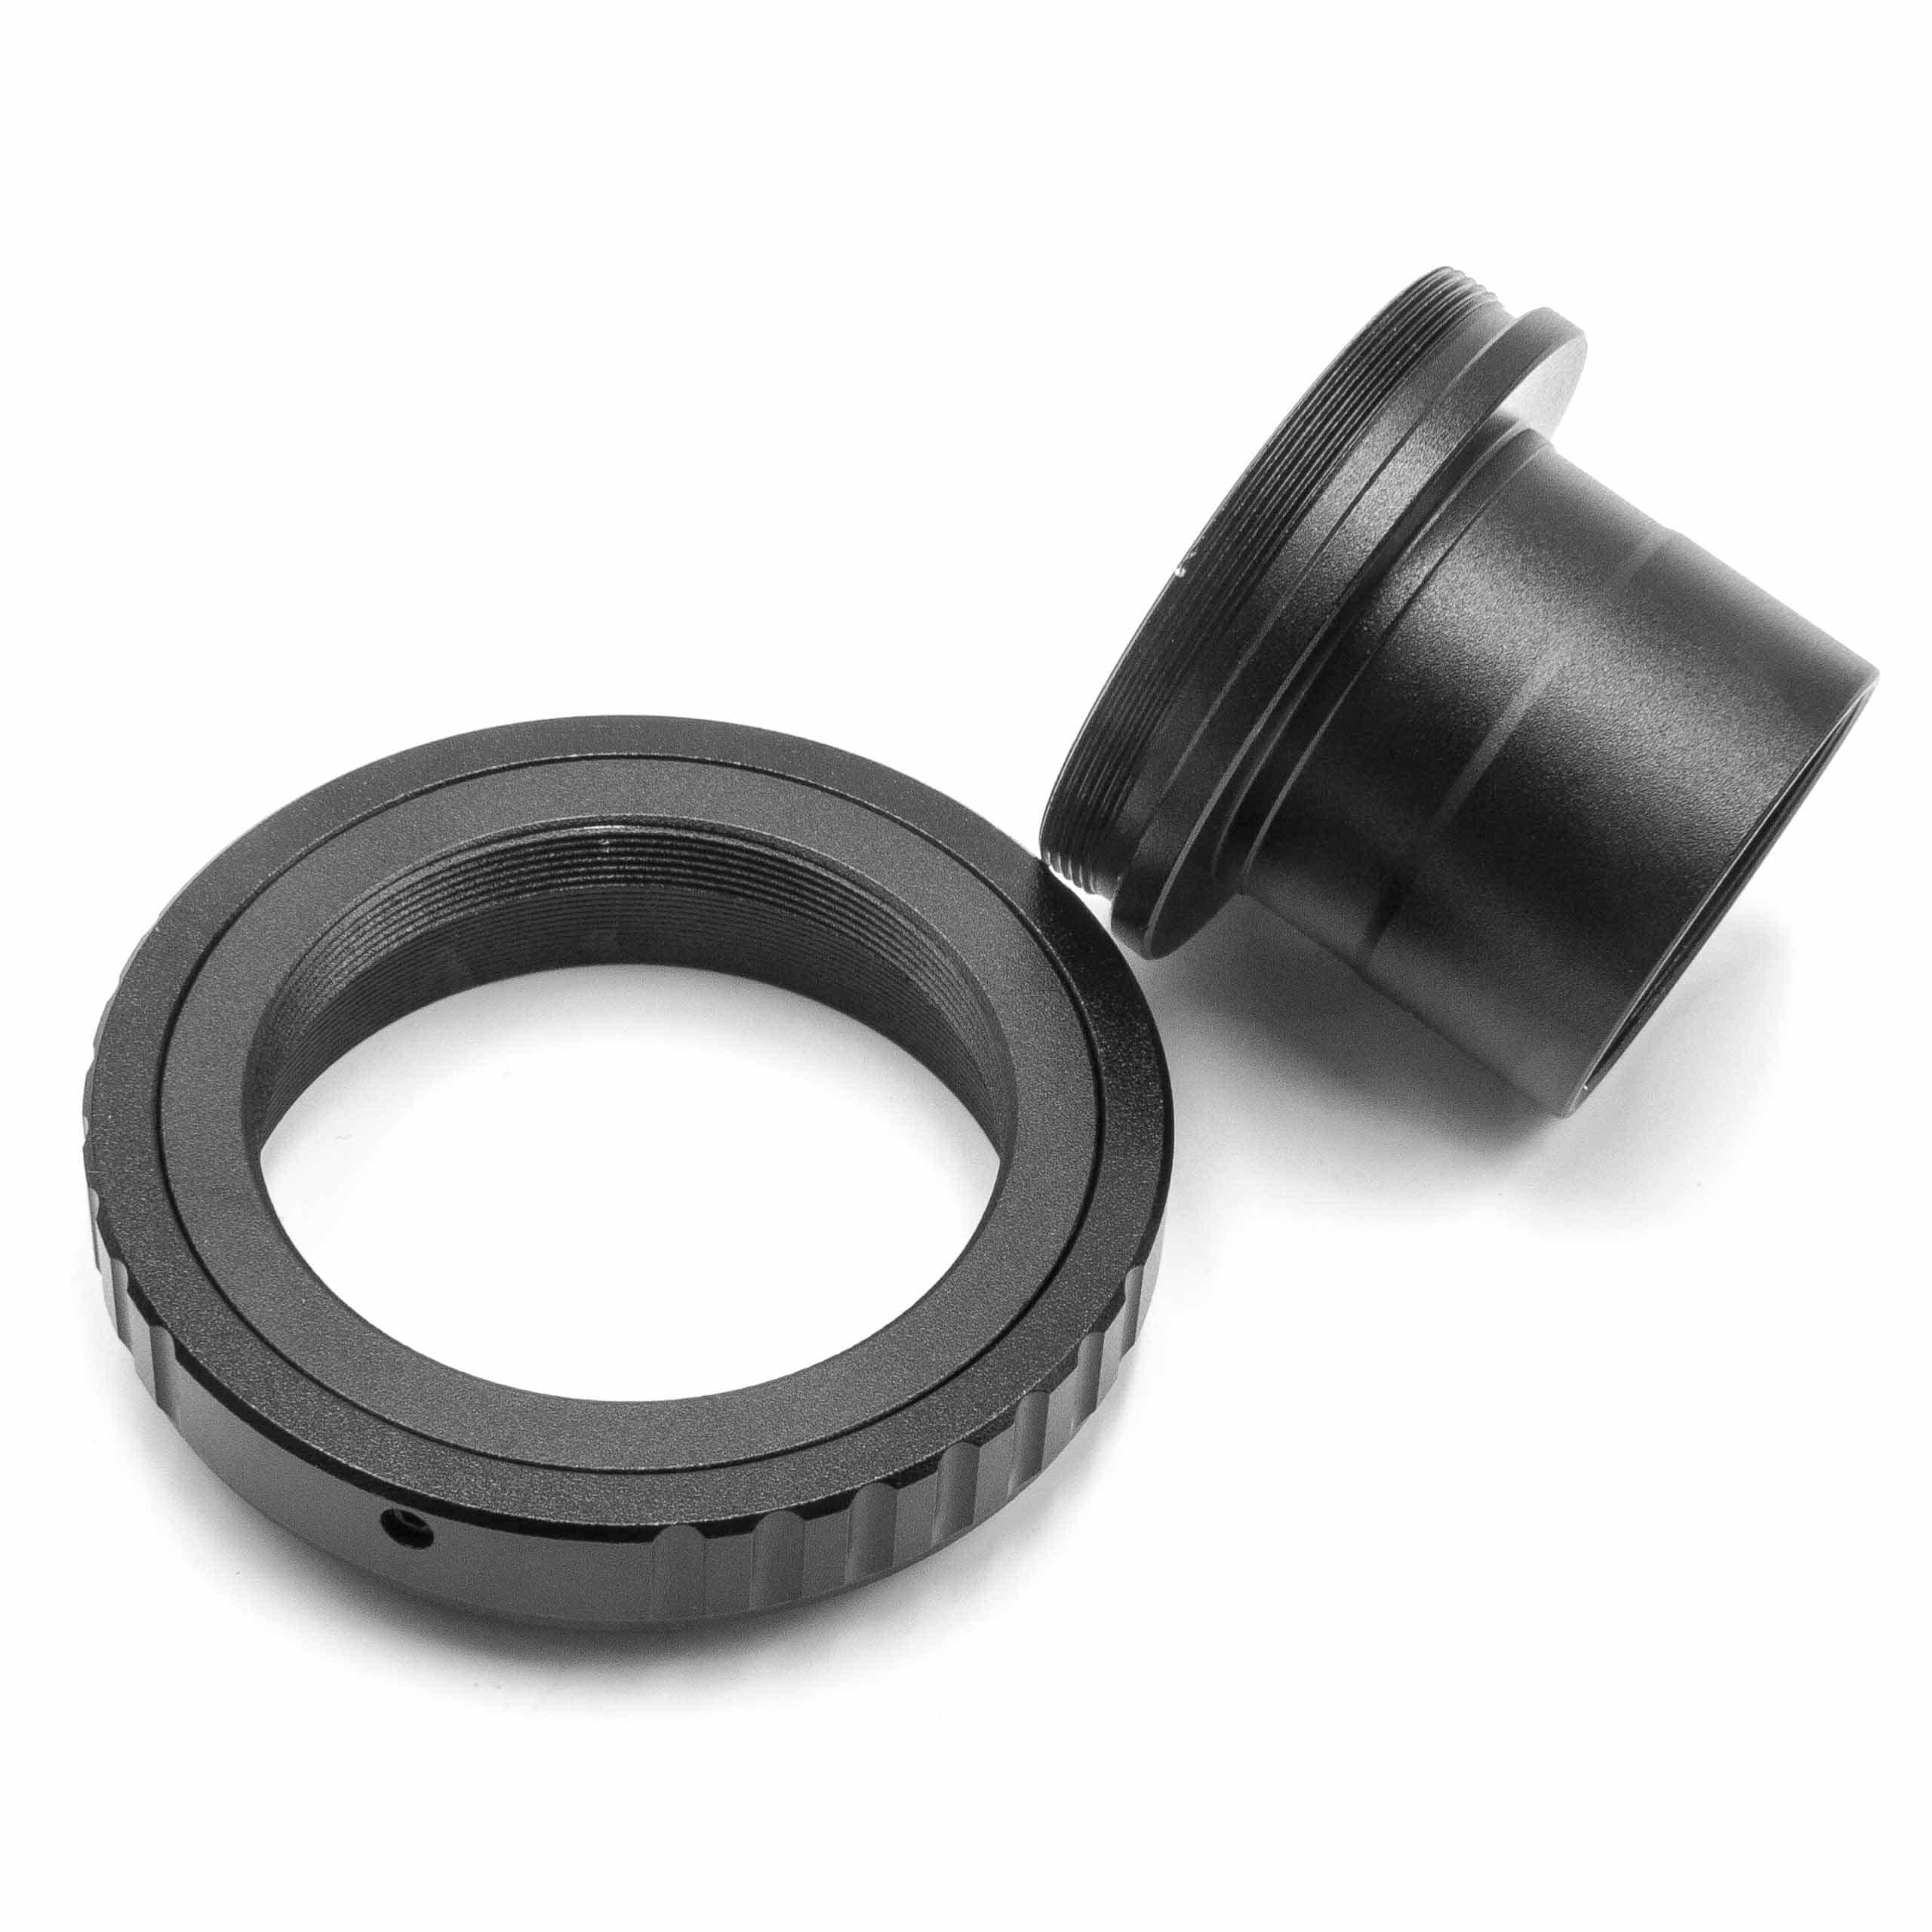 2x Adapter ring, T2-ring adapter, lens mount adapter 1,25" - M42 x 075" suitable for Minolta / Sony AF telesco